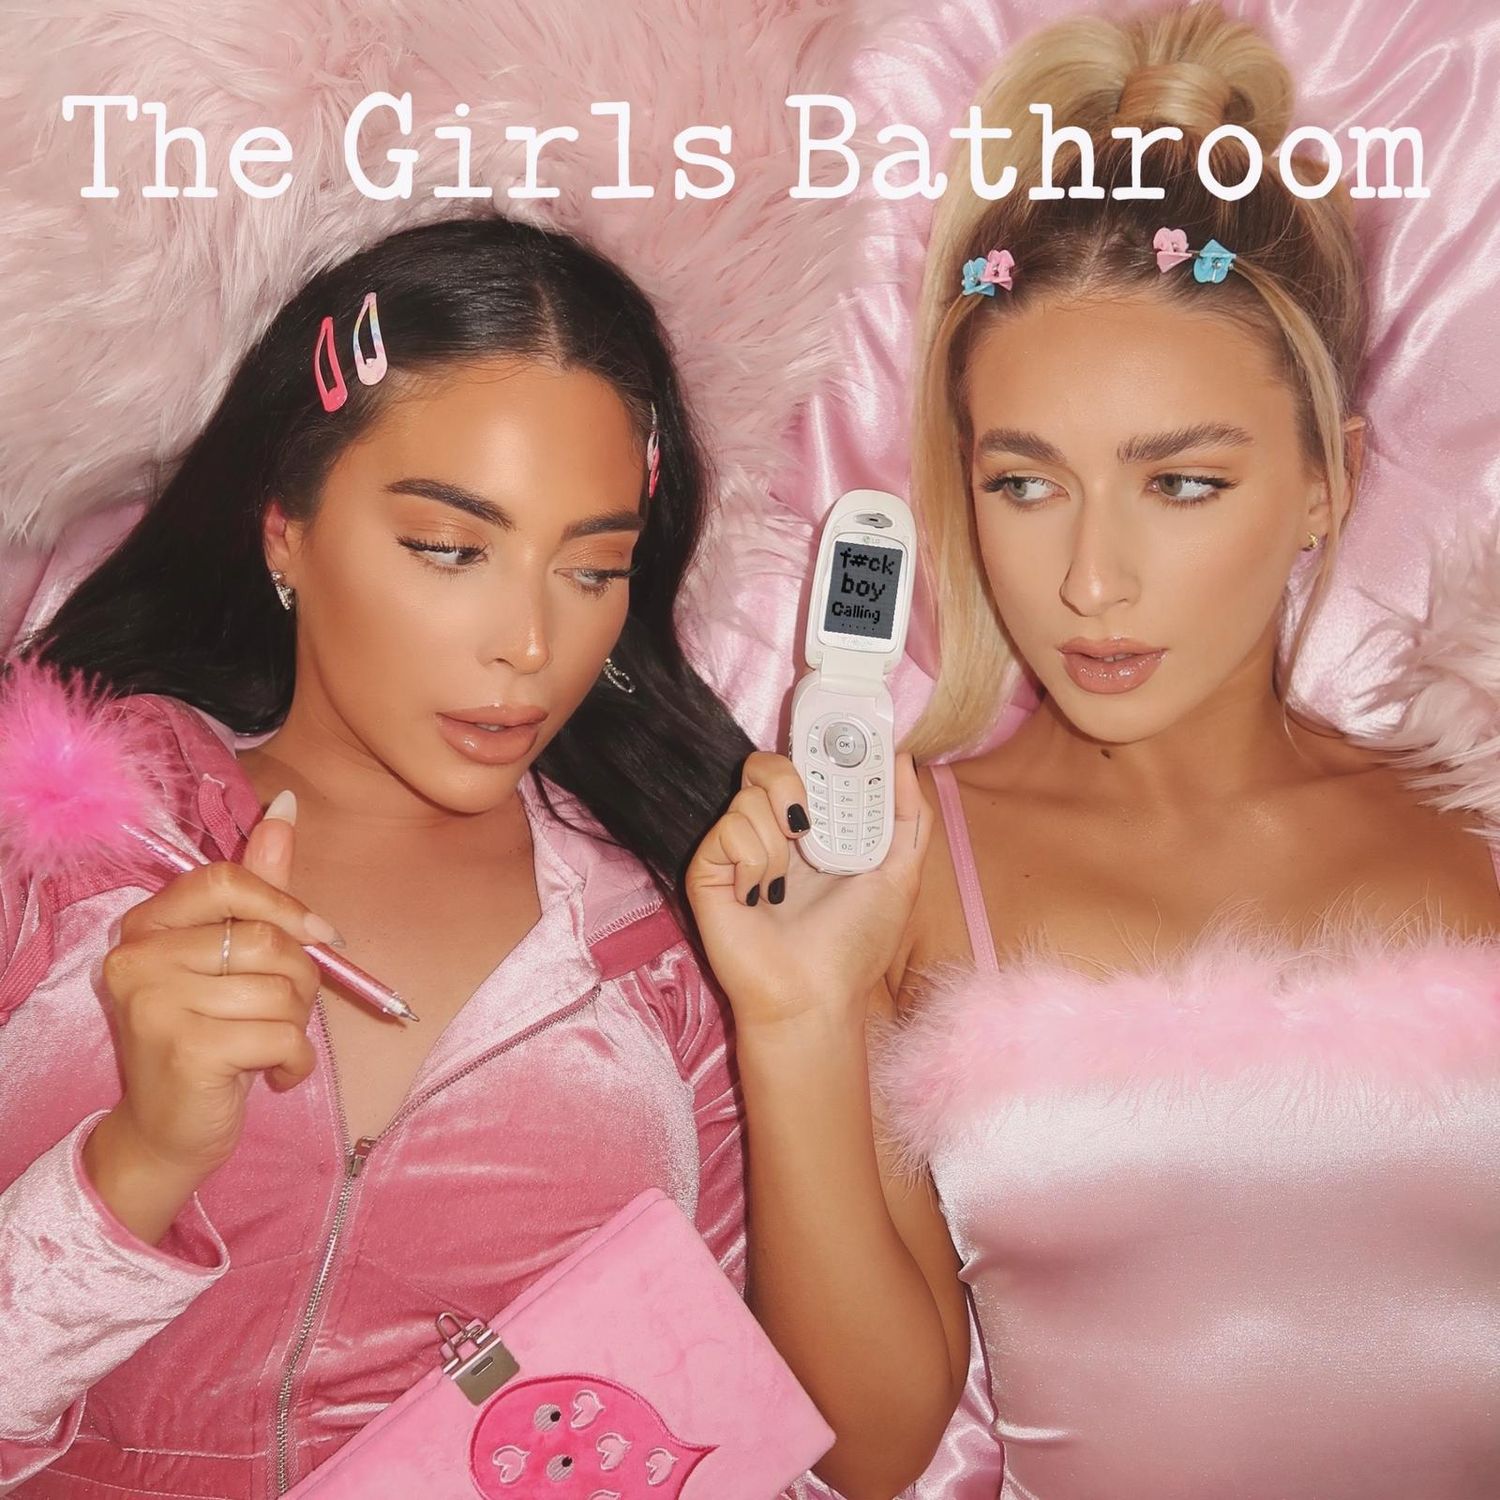 The Girls Bathroom Planet Tour at Vicar Street Tickets